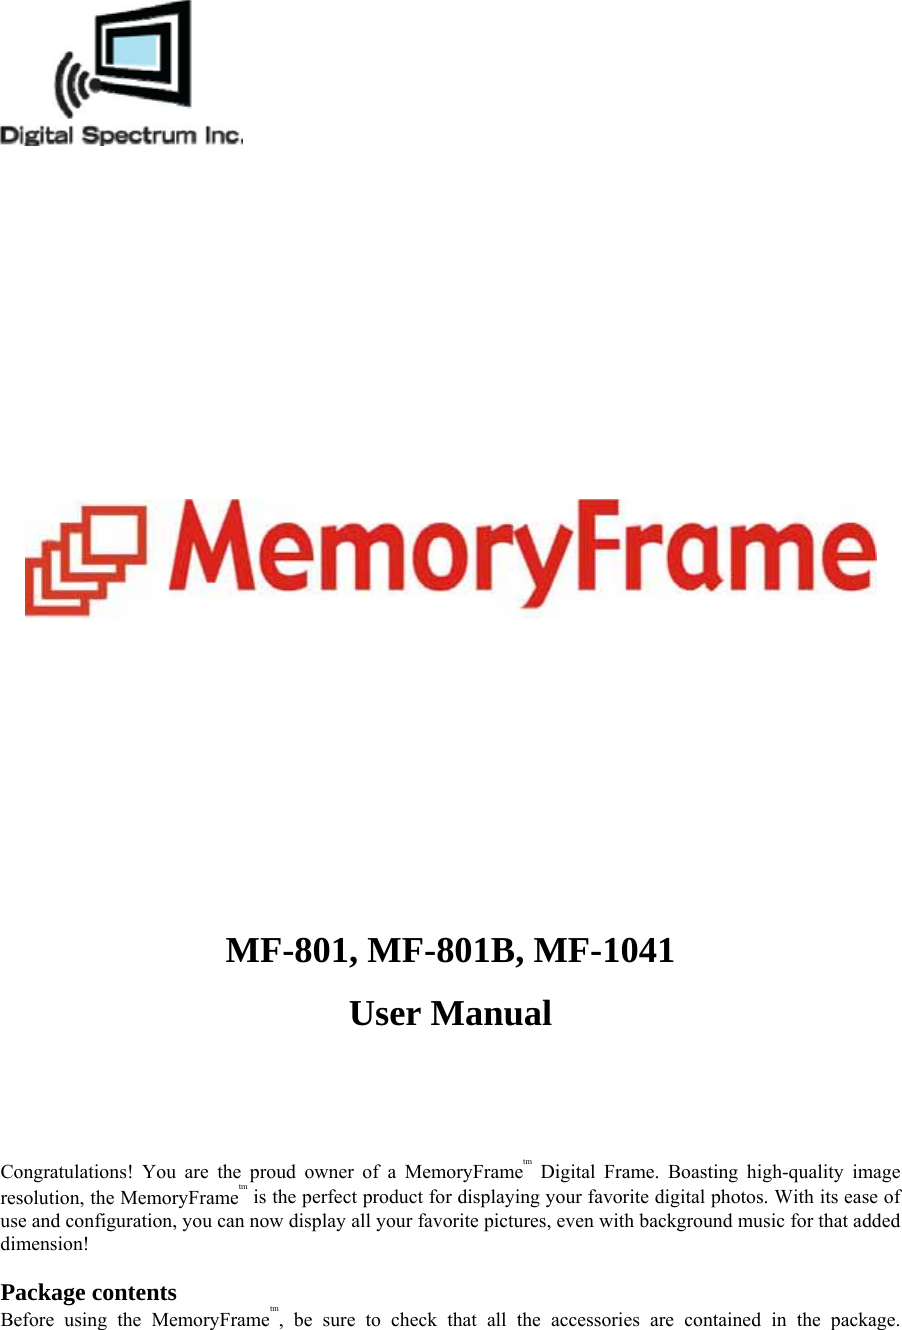   MF-801, MF-801B, MF-1041   User Manual     Congratulations! You are the proud owner of a MemoryFrametm Digital Frame. Boasting high-quality image resolution, the MemoryFrametm is the perfect product for displaying your favorite digital photos. With its ease of use and configuration, you can now display all your favorite pictures, even with background music for that added dimension!  Package contents   Before using the MemoryFrametm, be sure to check that all the accessories are contained in the package. 